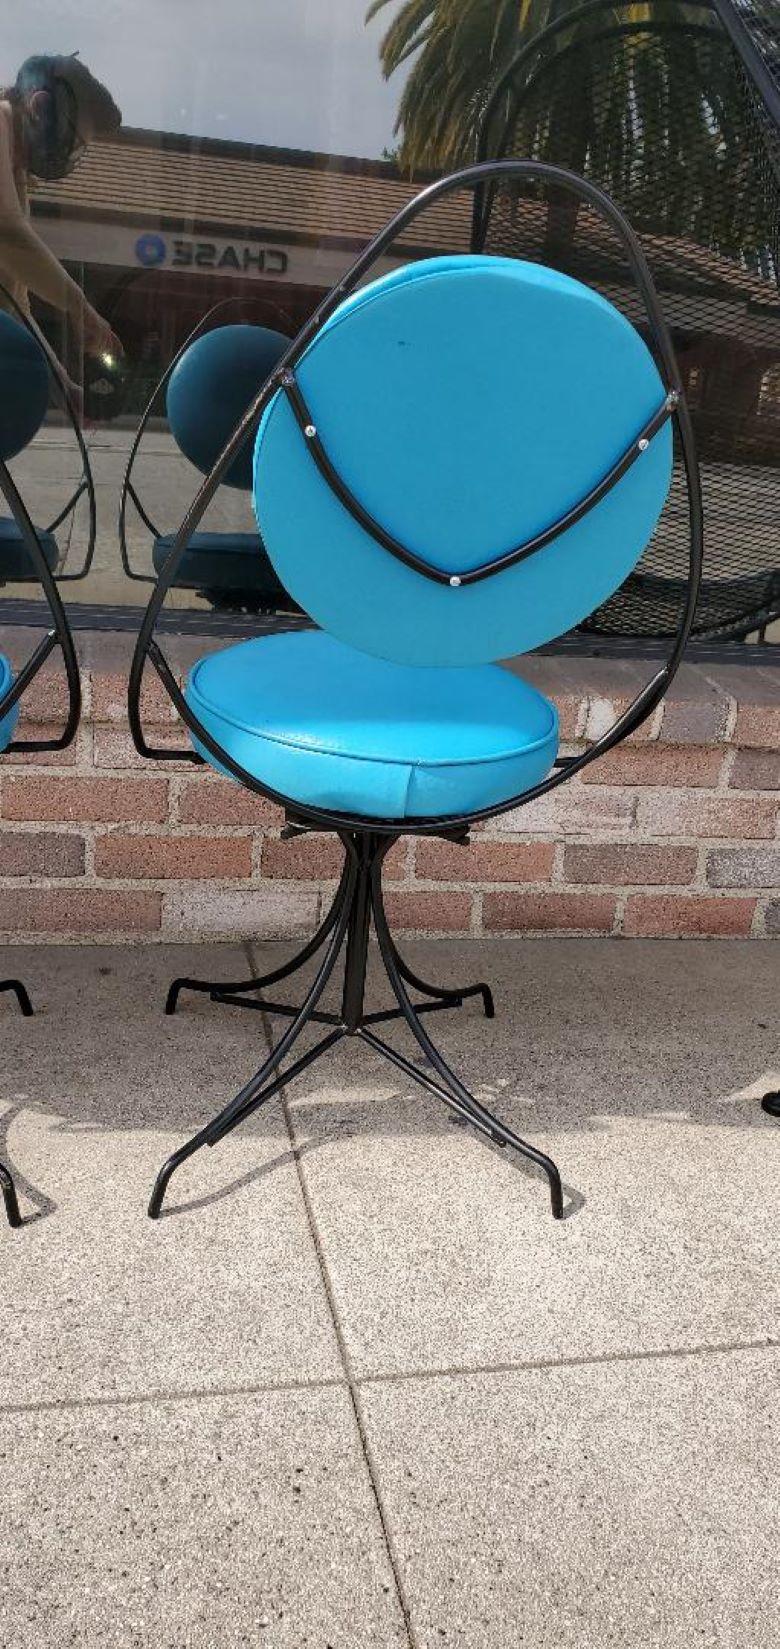 1950s Black and Blue Swivel Side Chairs Styled After John Risley - Set of 2 For Sale 2